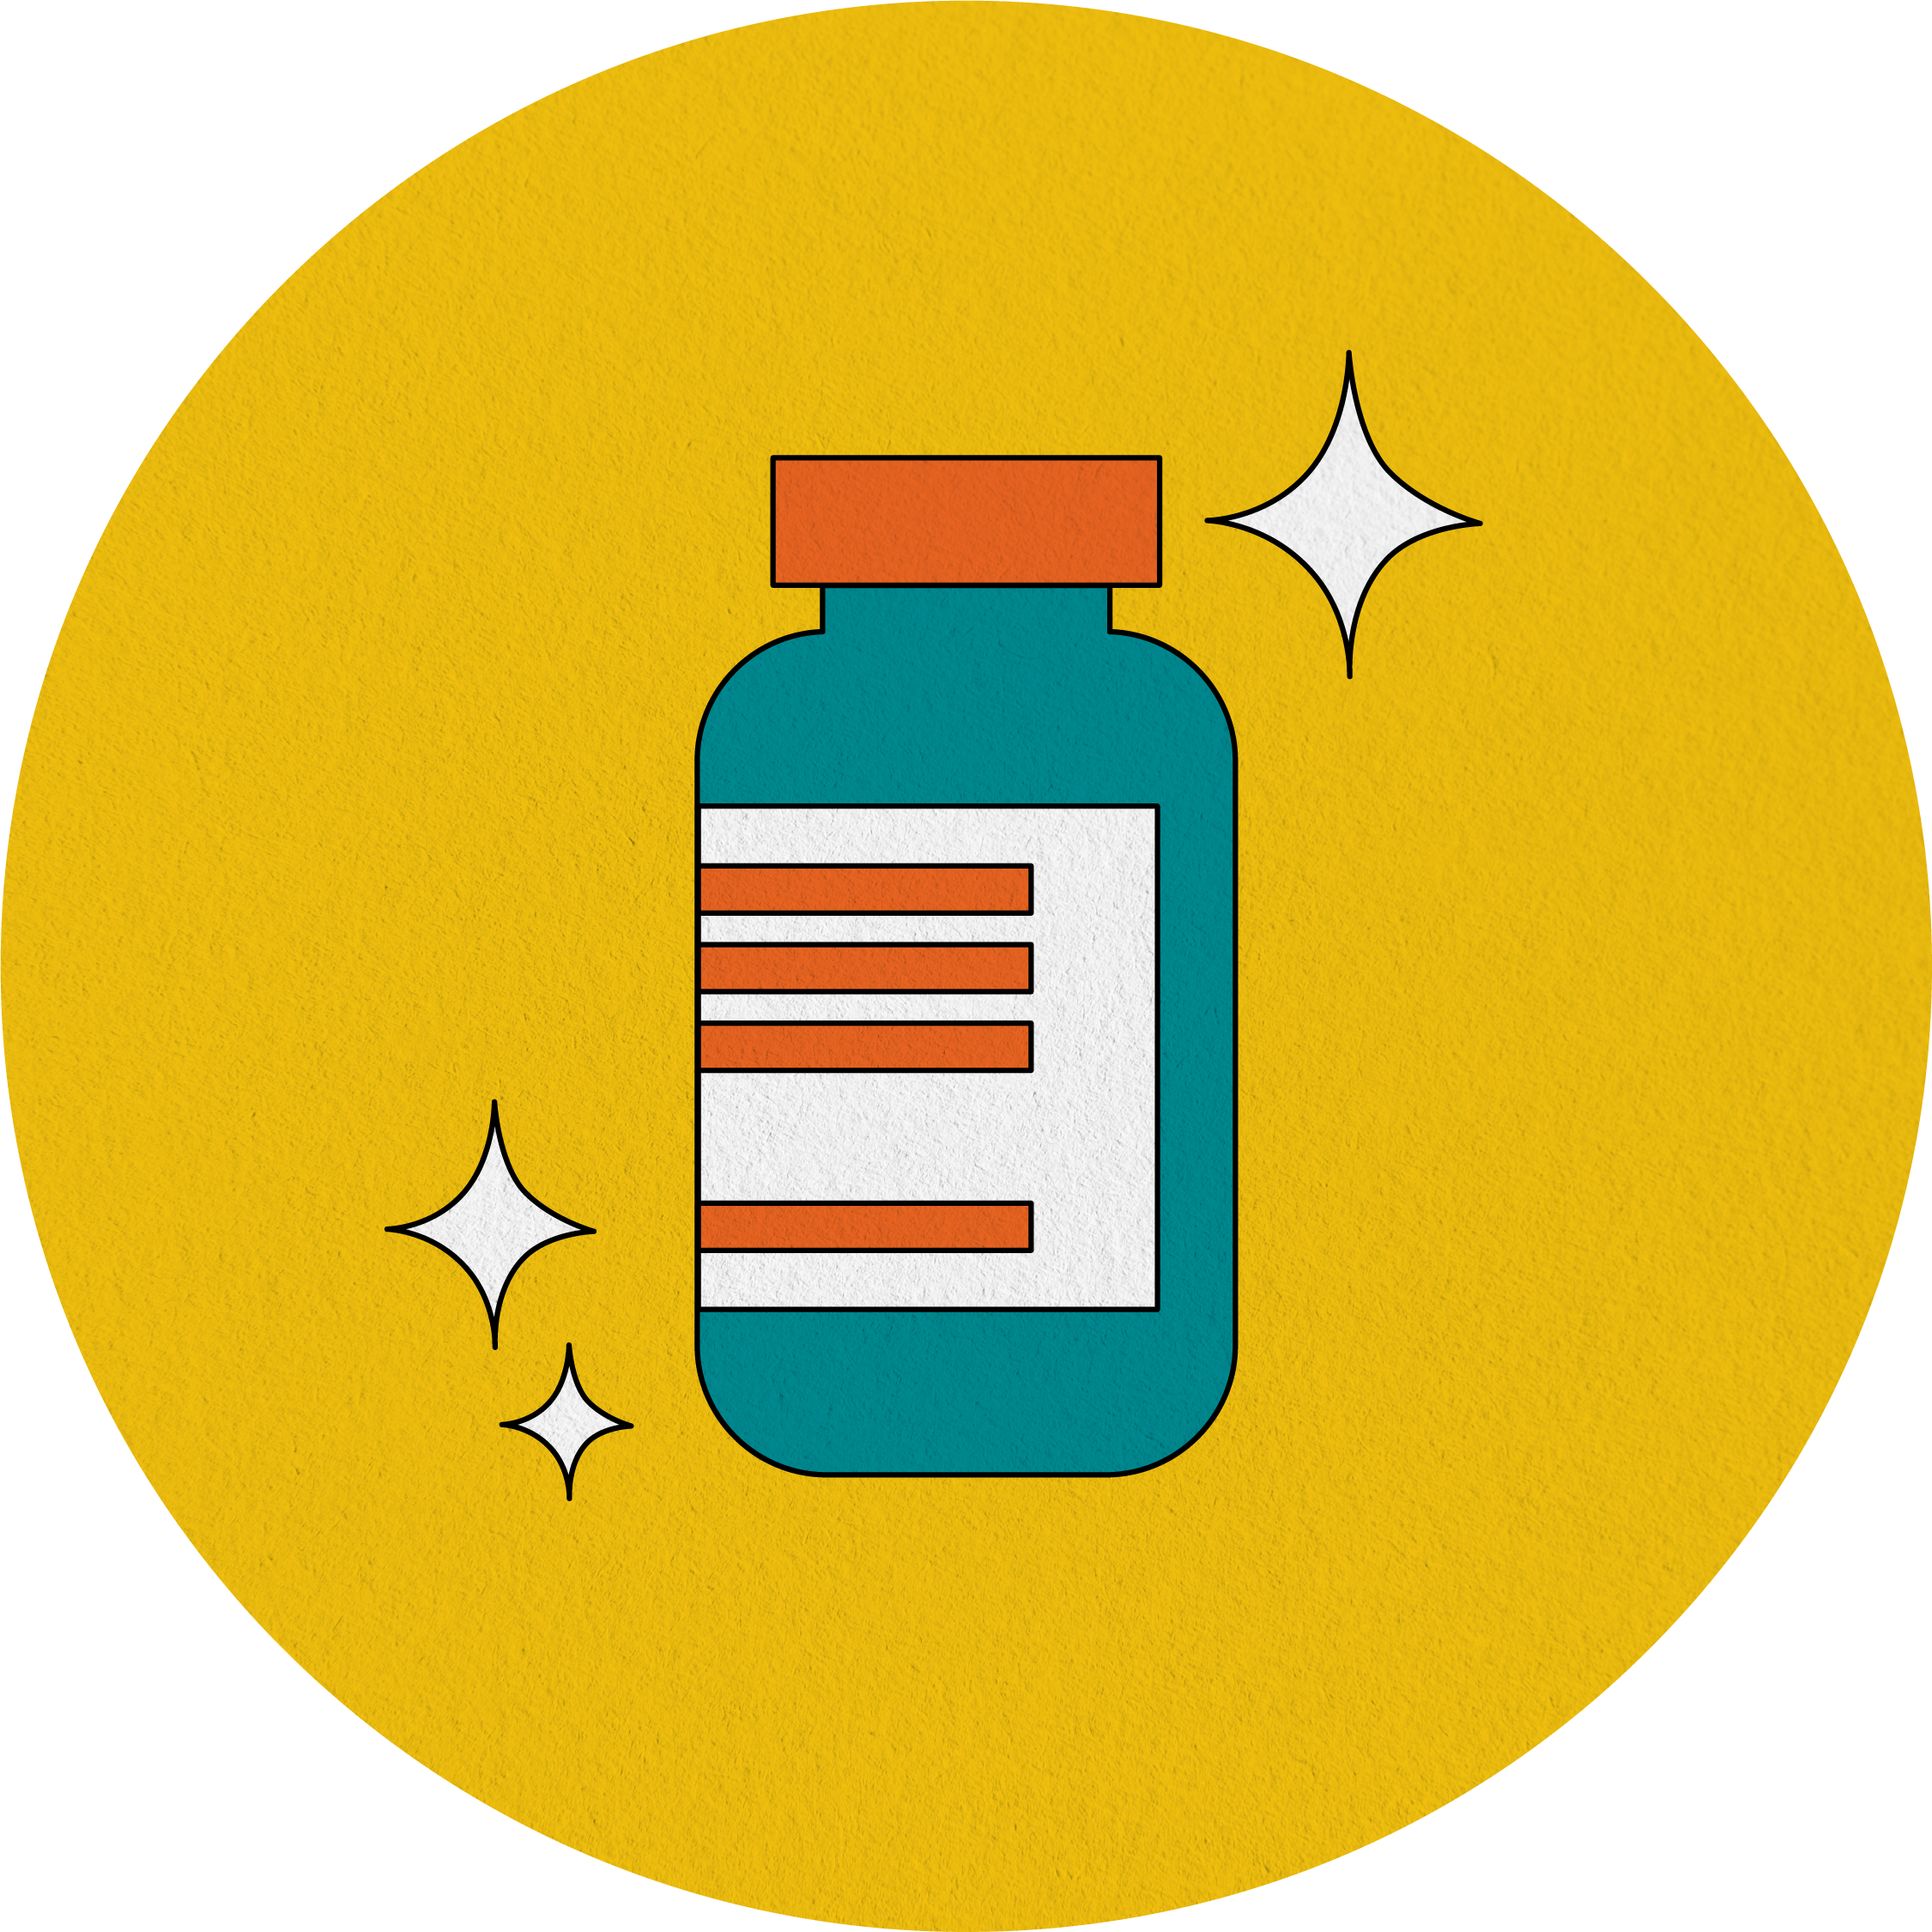 Illustration of green vaccine vial with stars around it on yellow background.